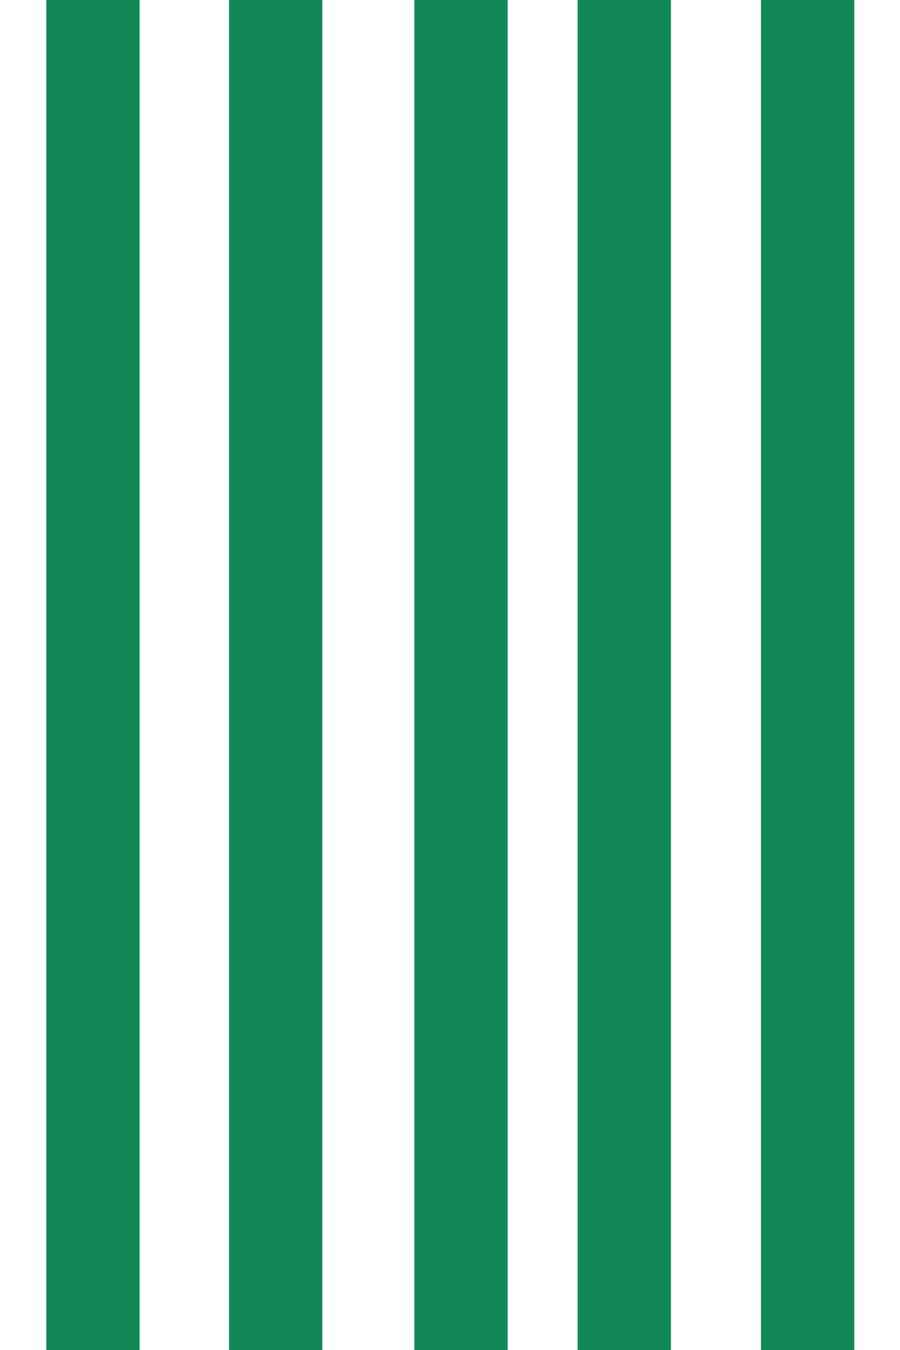 Woolf With Me Fitted Crib Sheet Stripes color_kelly-green